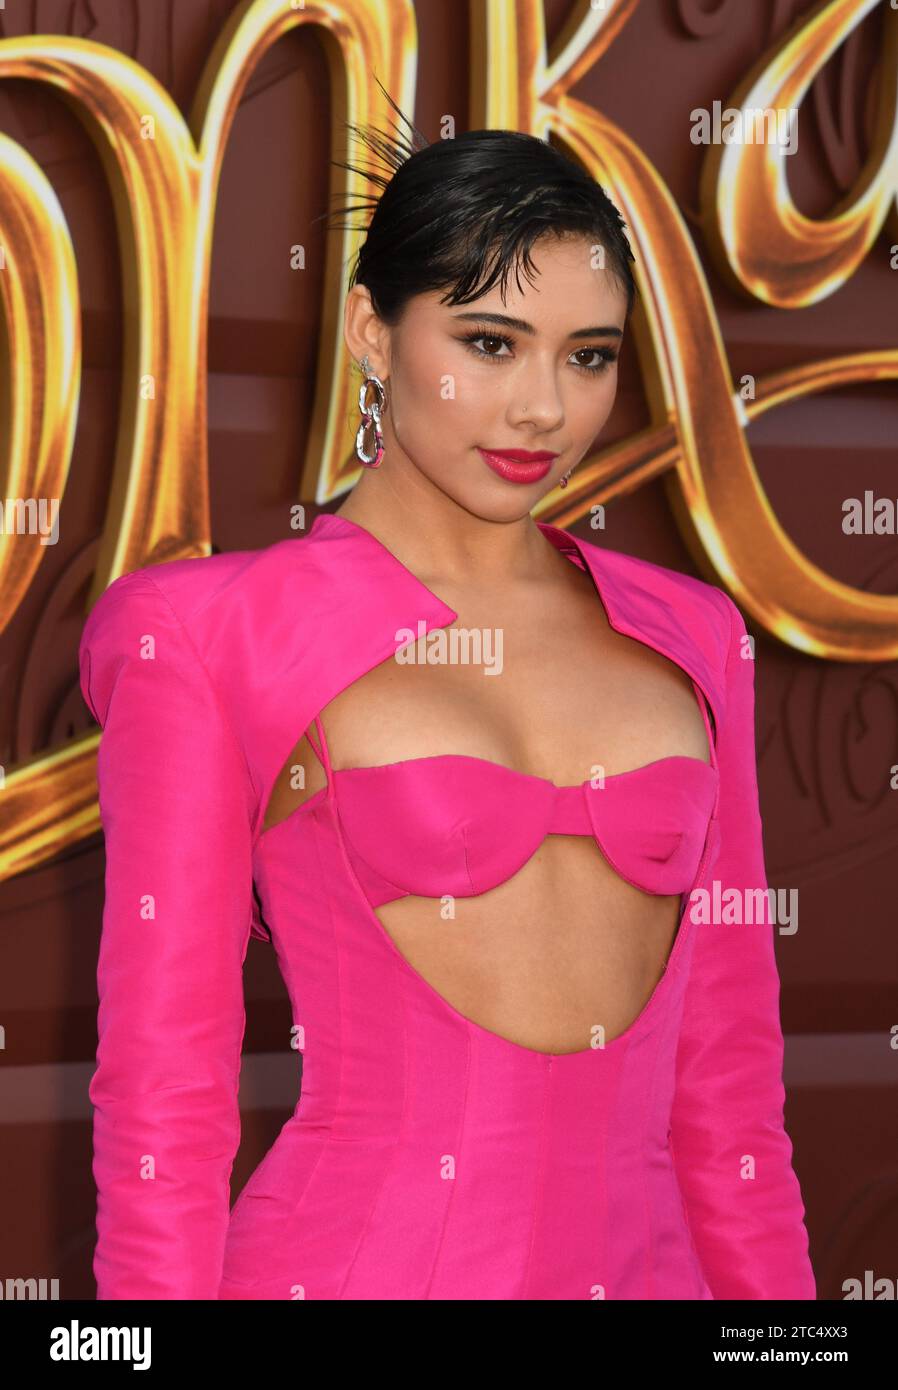 Los Angeles, Ca. 10th Dec, 2023. Xochitl Gomez at the premiere of Wonka at the Regency Village Theater in Westwood, California on December 10, 2023. Credit: Jeffrey Mayer/Jtm Photos/Media Punch/Alamy Live News Stock Photo